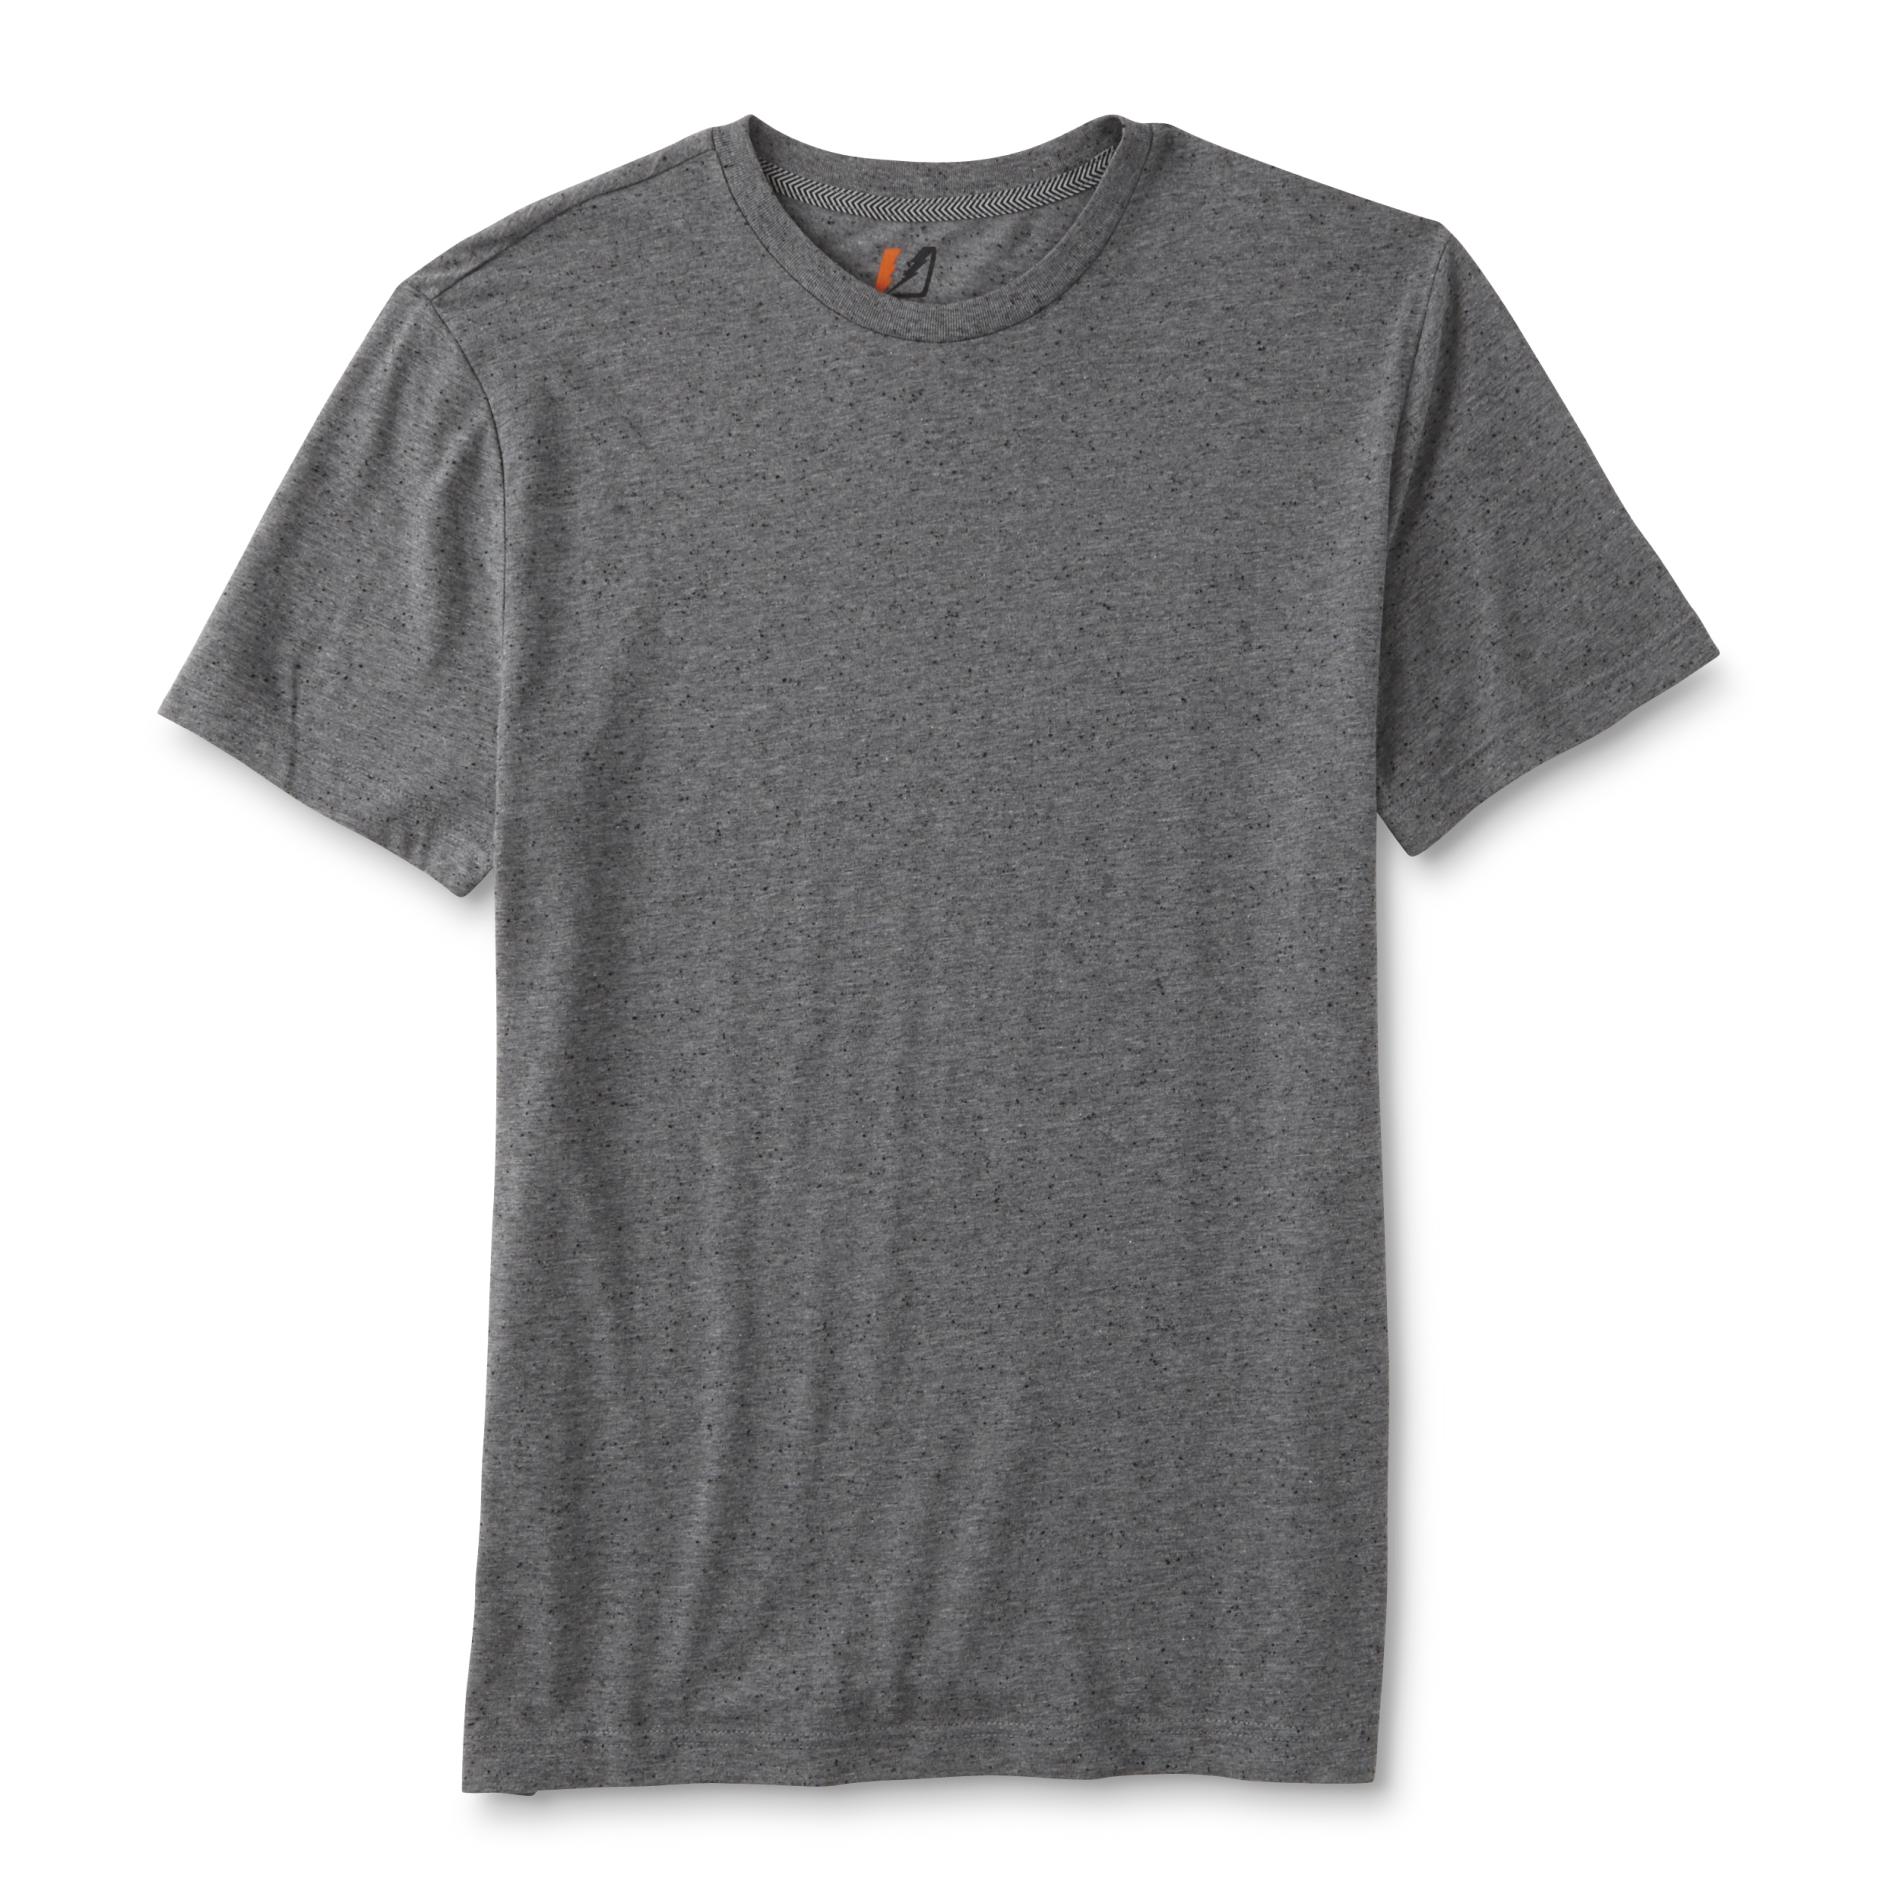 Amplify Young Men's T-Shirt - Speckled